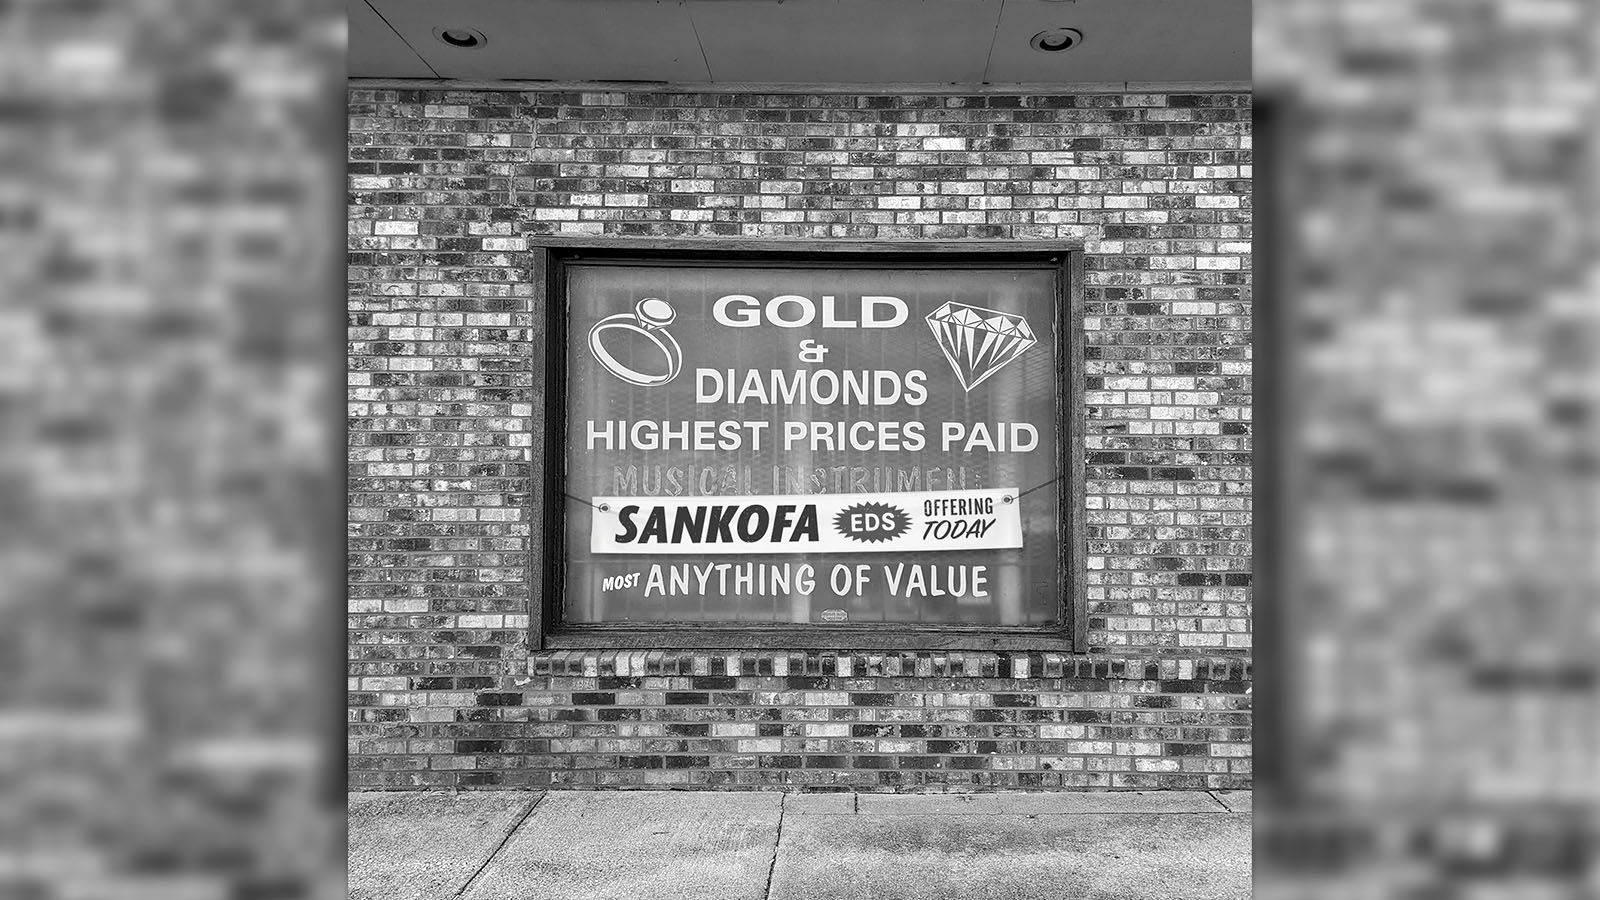 Sankofa delivers another stellar album with "Most Anything of Value."